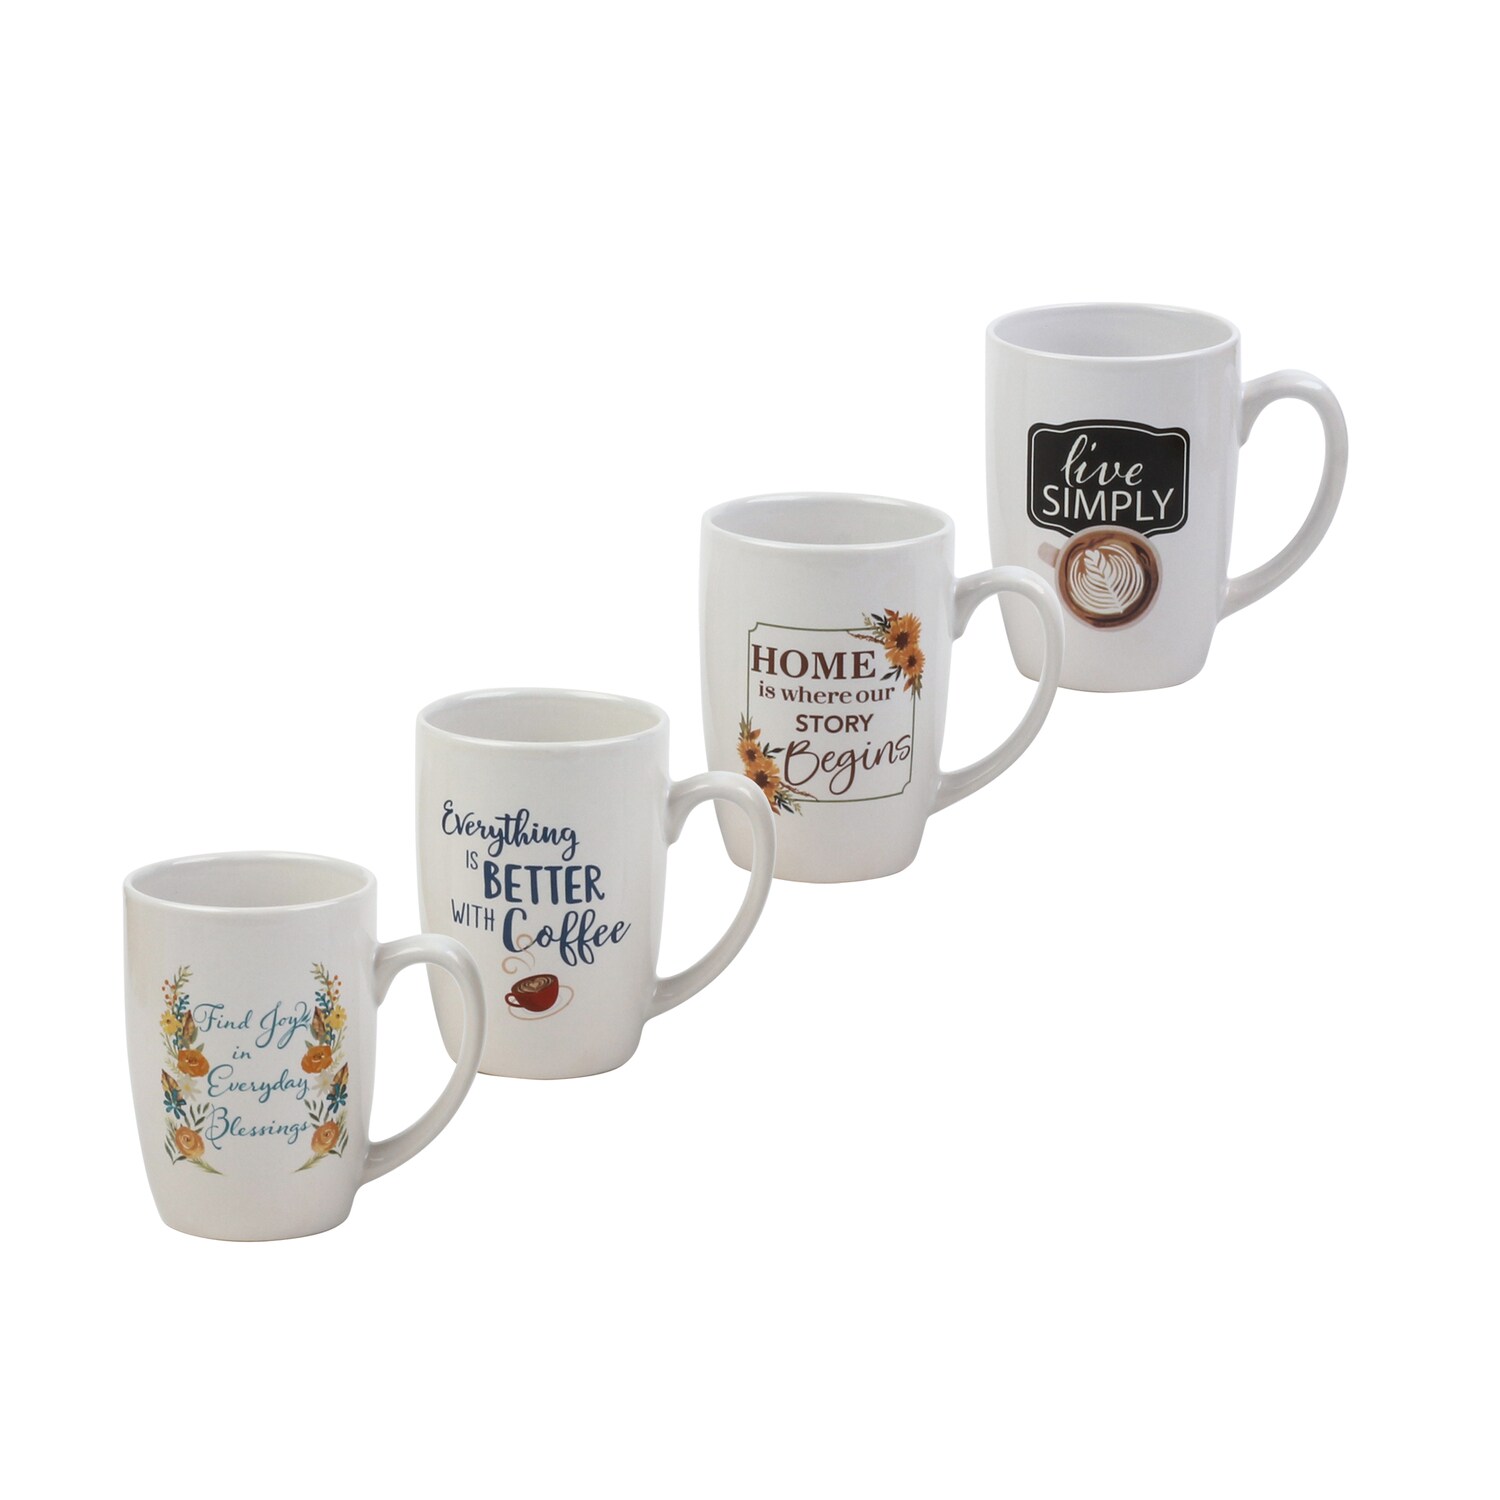 Clubdeer Dont Touch Me COVID-19 Coffee Mug 11OZ Size Cup Coffee Mug for Women//Boss//Friend//Employee or Spouse for Office Work Dishwasher and Microwave Safe